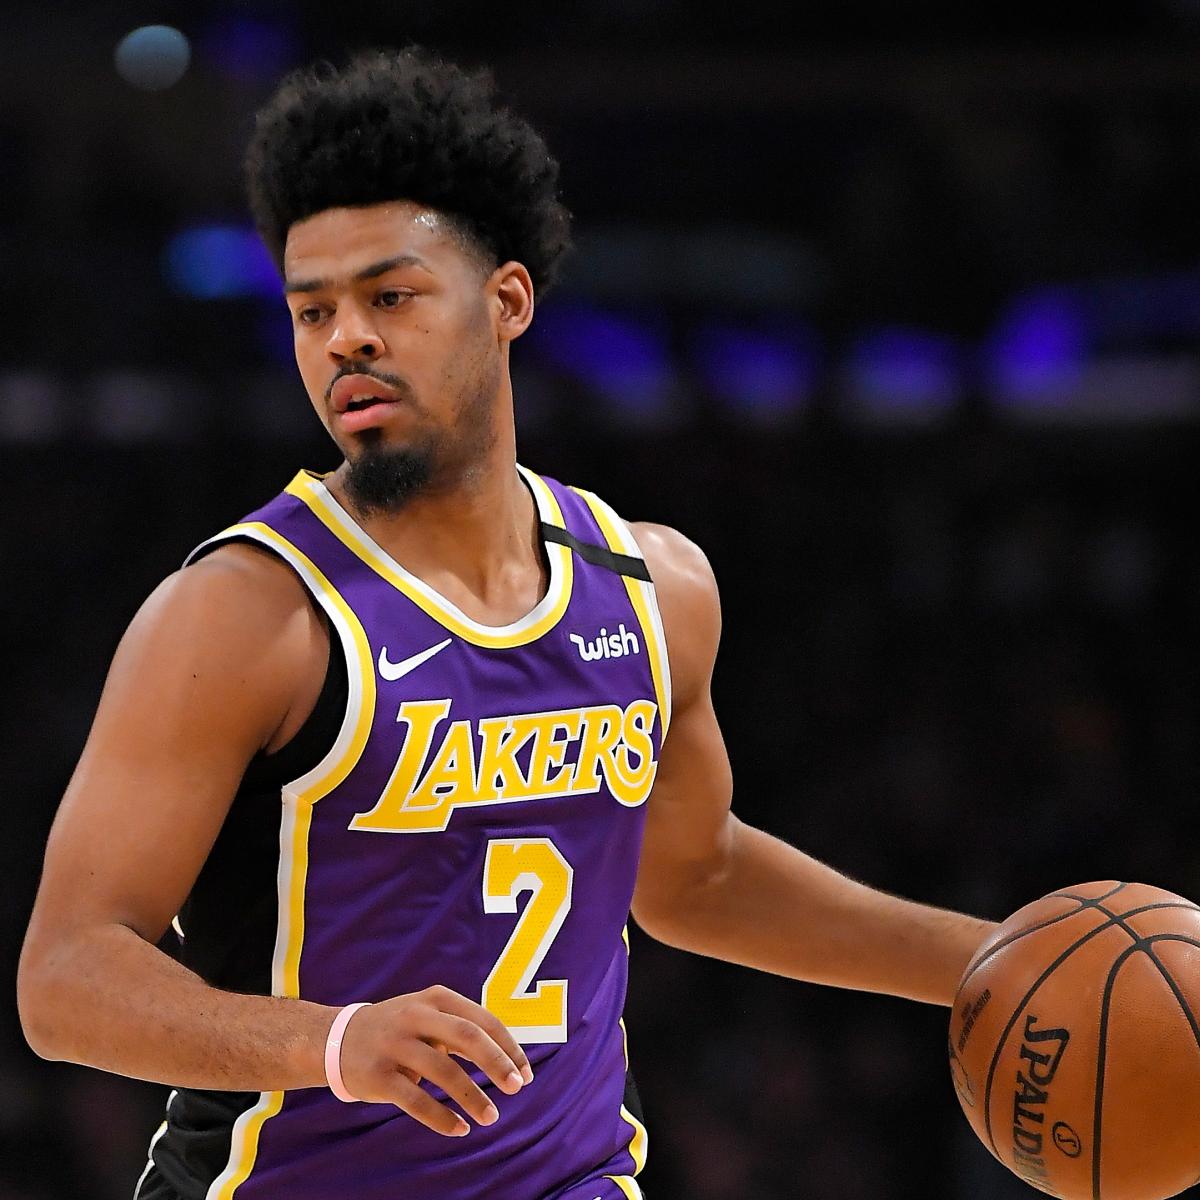 Quinn Cook Changes Lakers' Jersey Number to 28 to Honor Kobe, Gigi